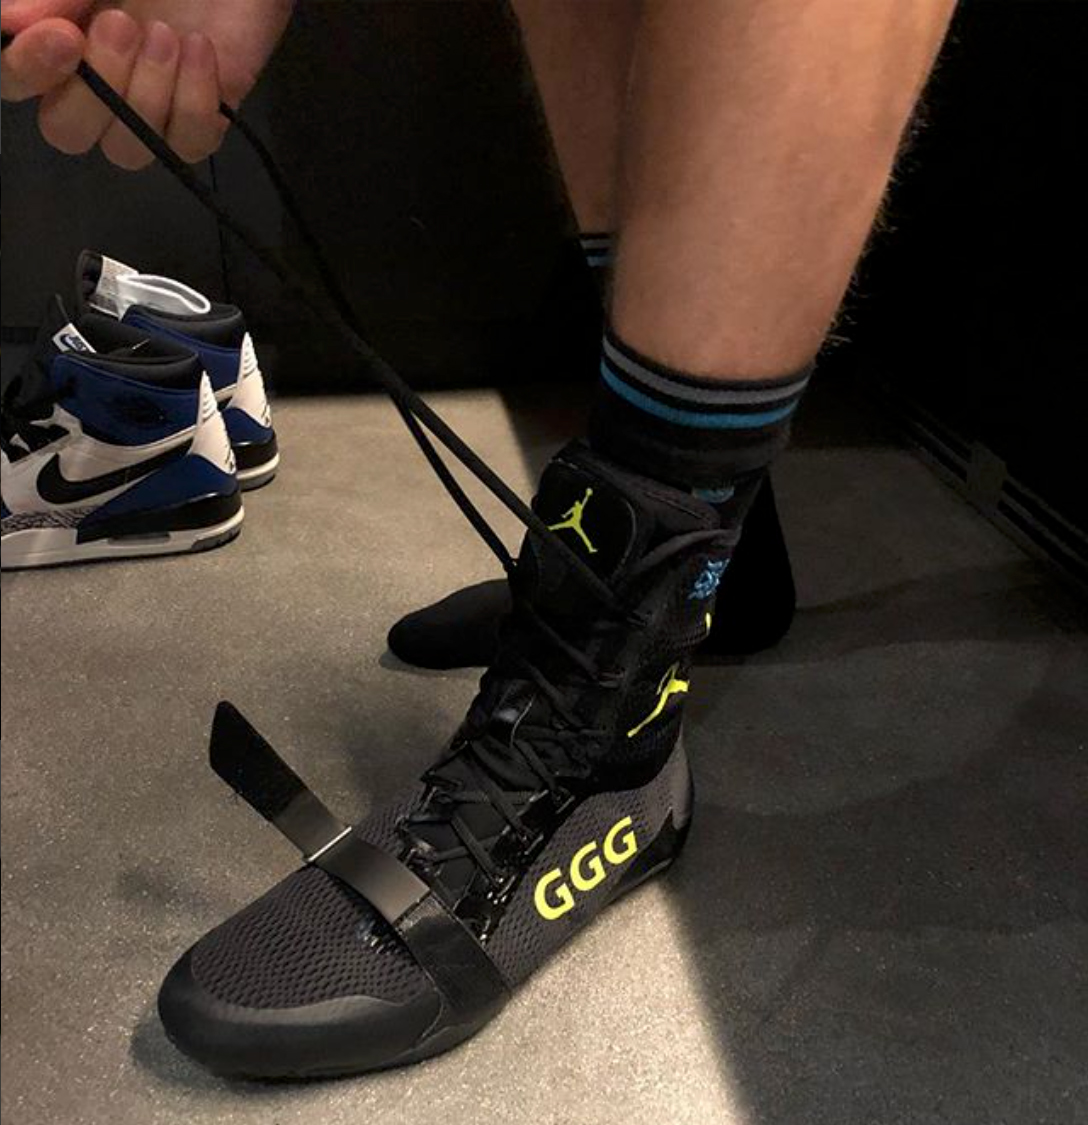 ggg boxing boots